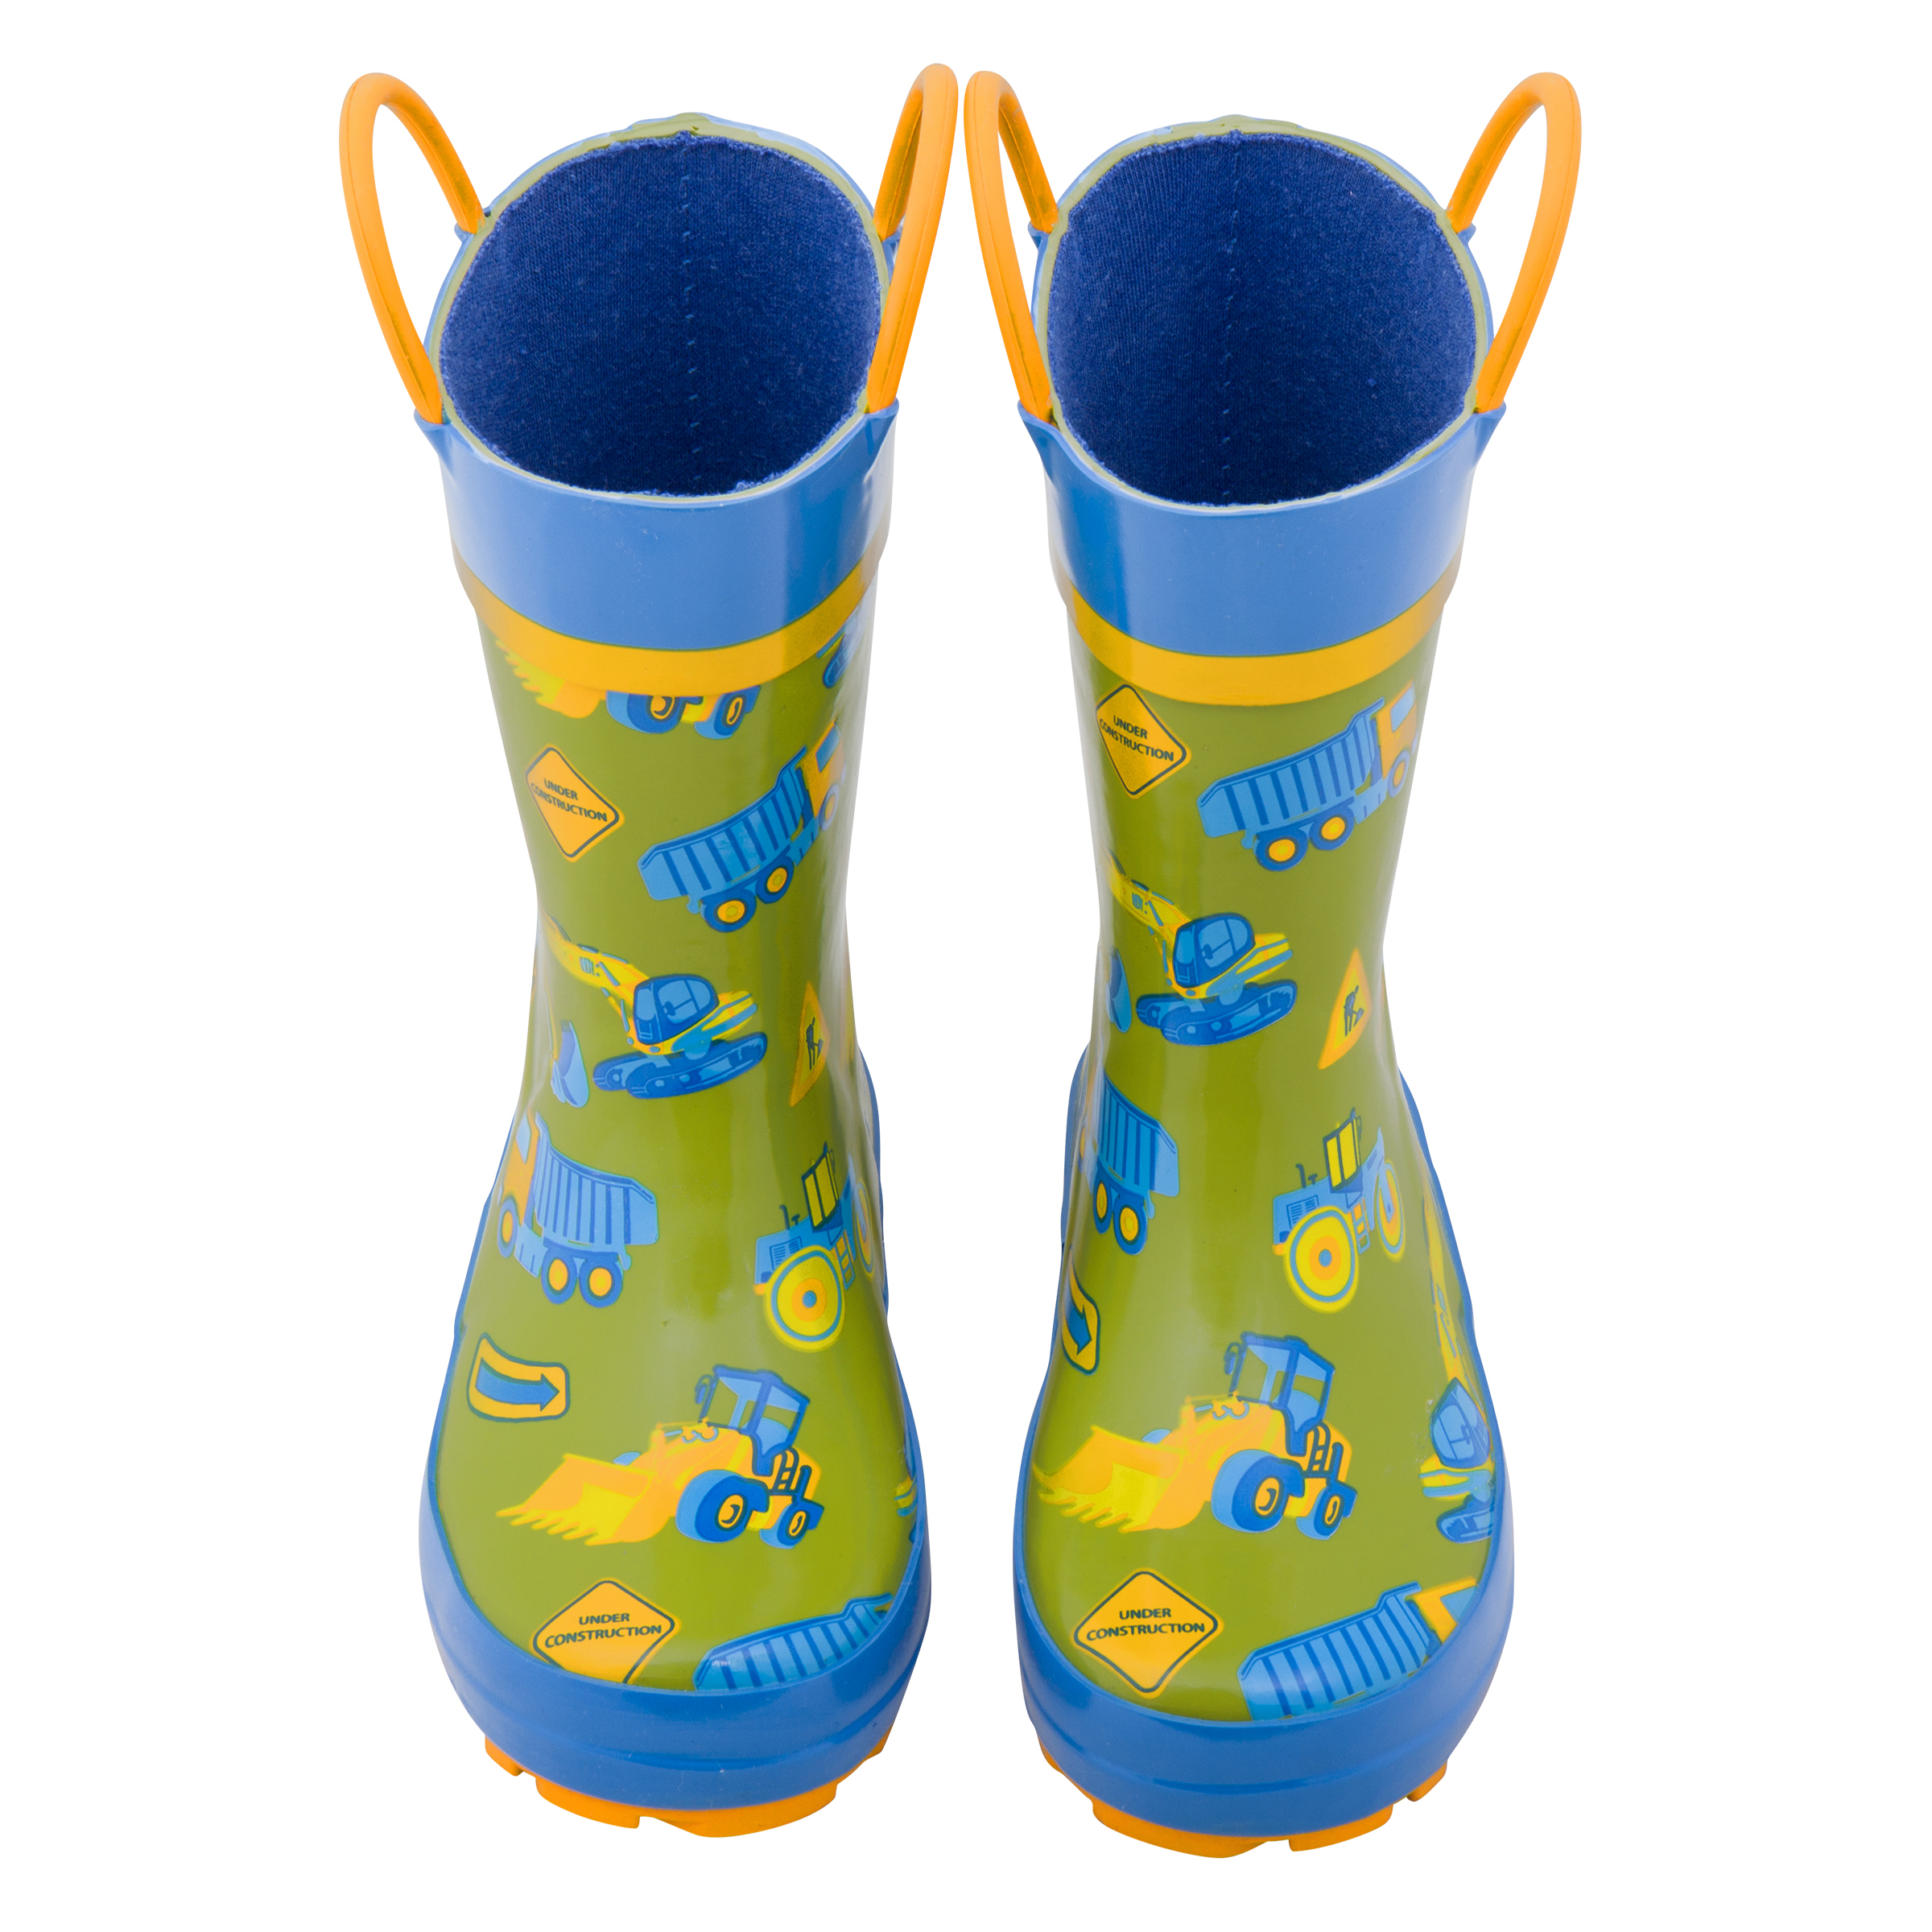 All Over Print Rainboots, Construction - image 2 of 4